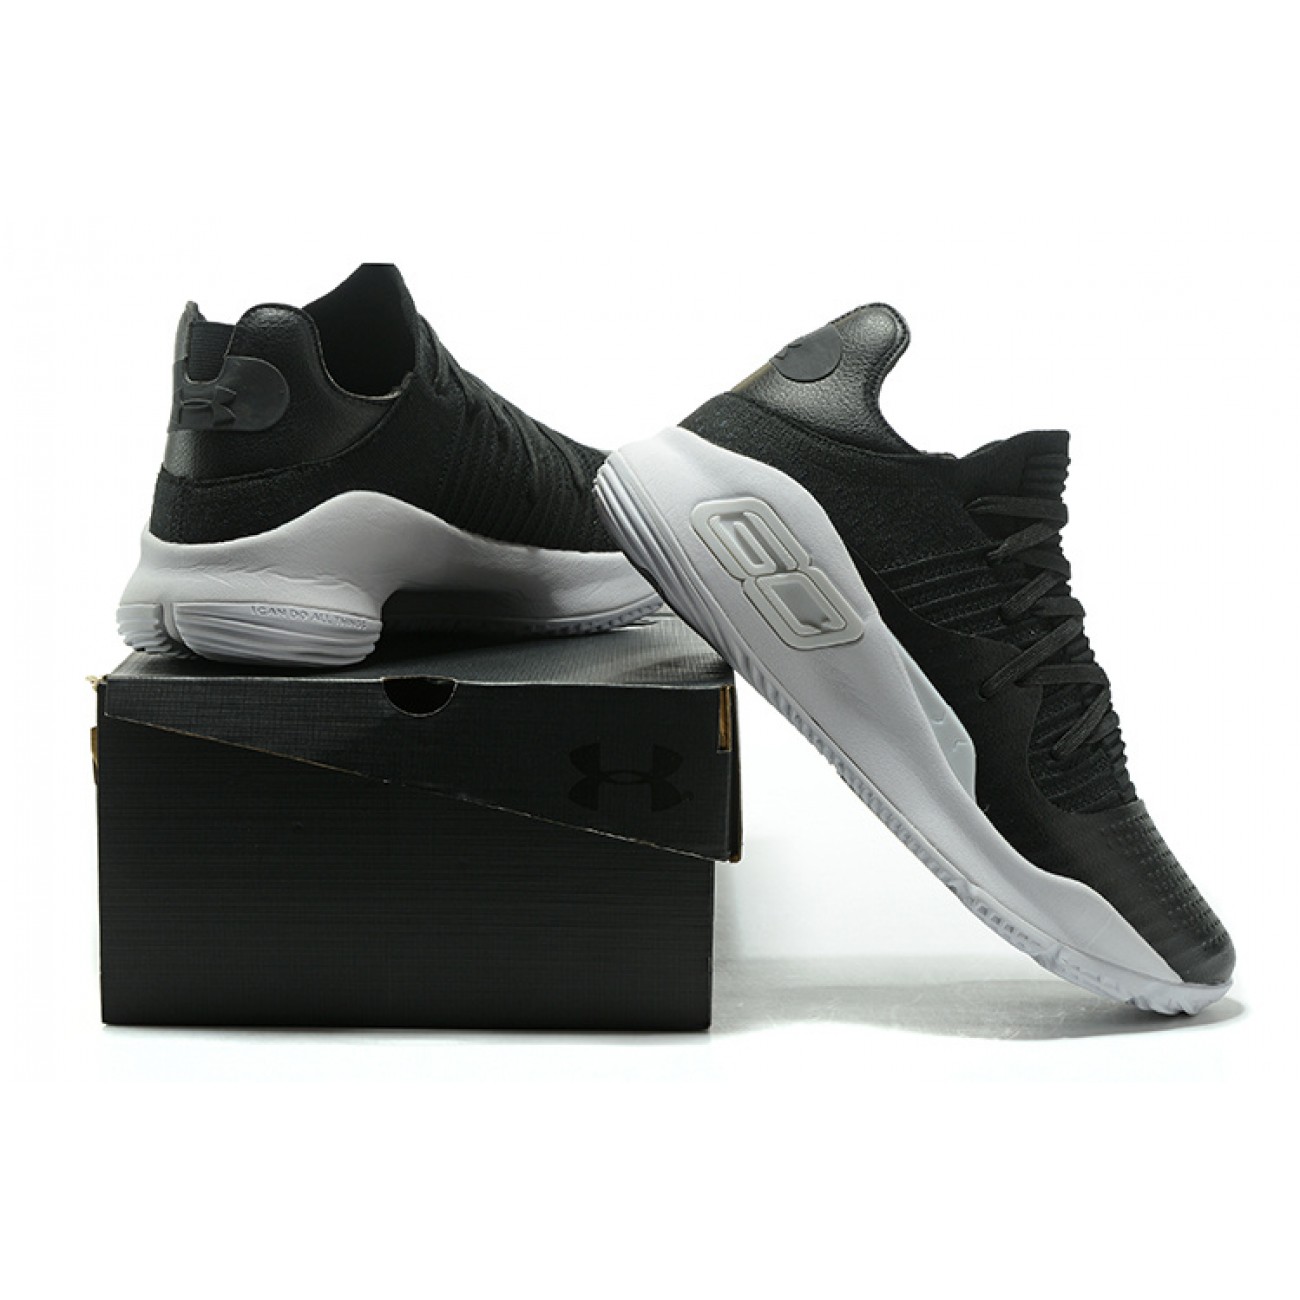 Under Armour UA Curry 4 Low Black/White